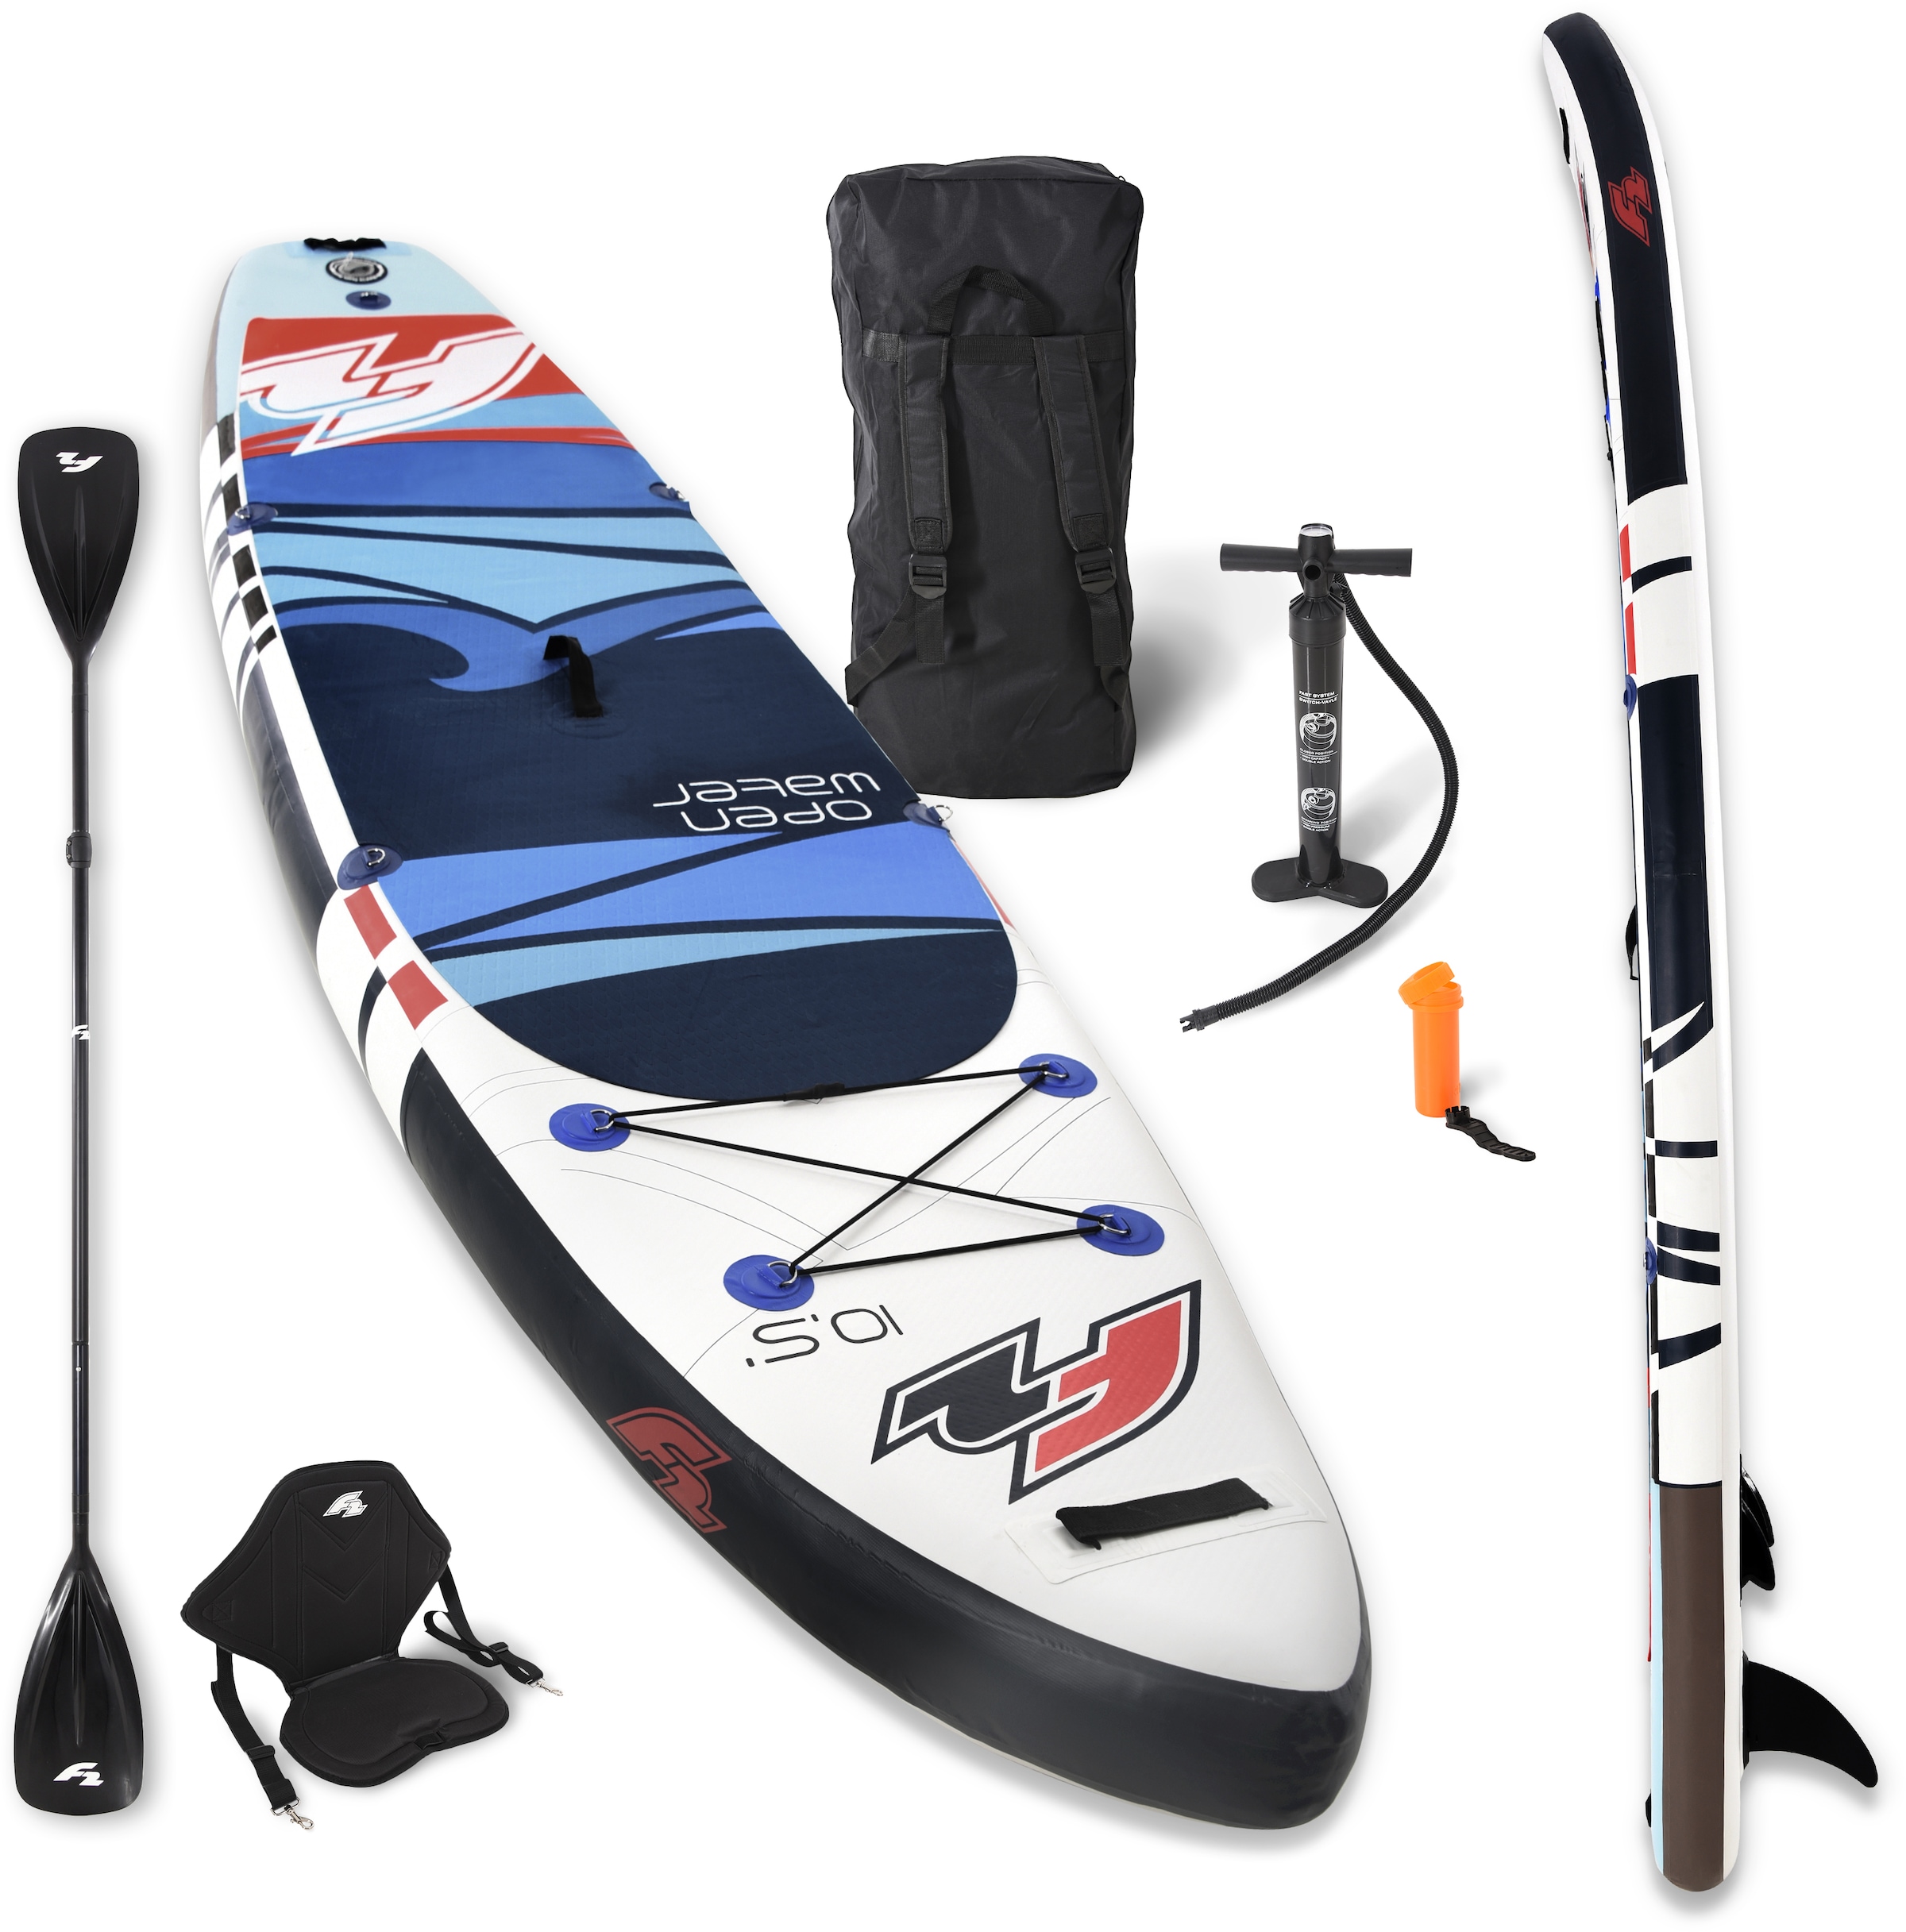 Stand-Up-Paddle online kaufen | bei SUP-Boards UNIVERSAL Moderne